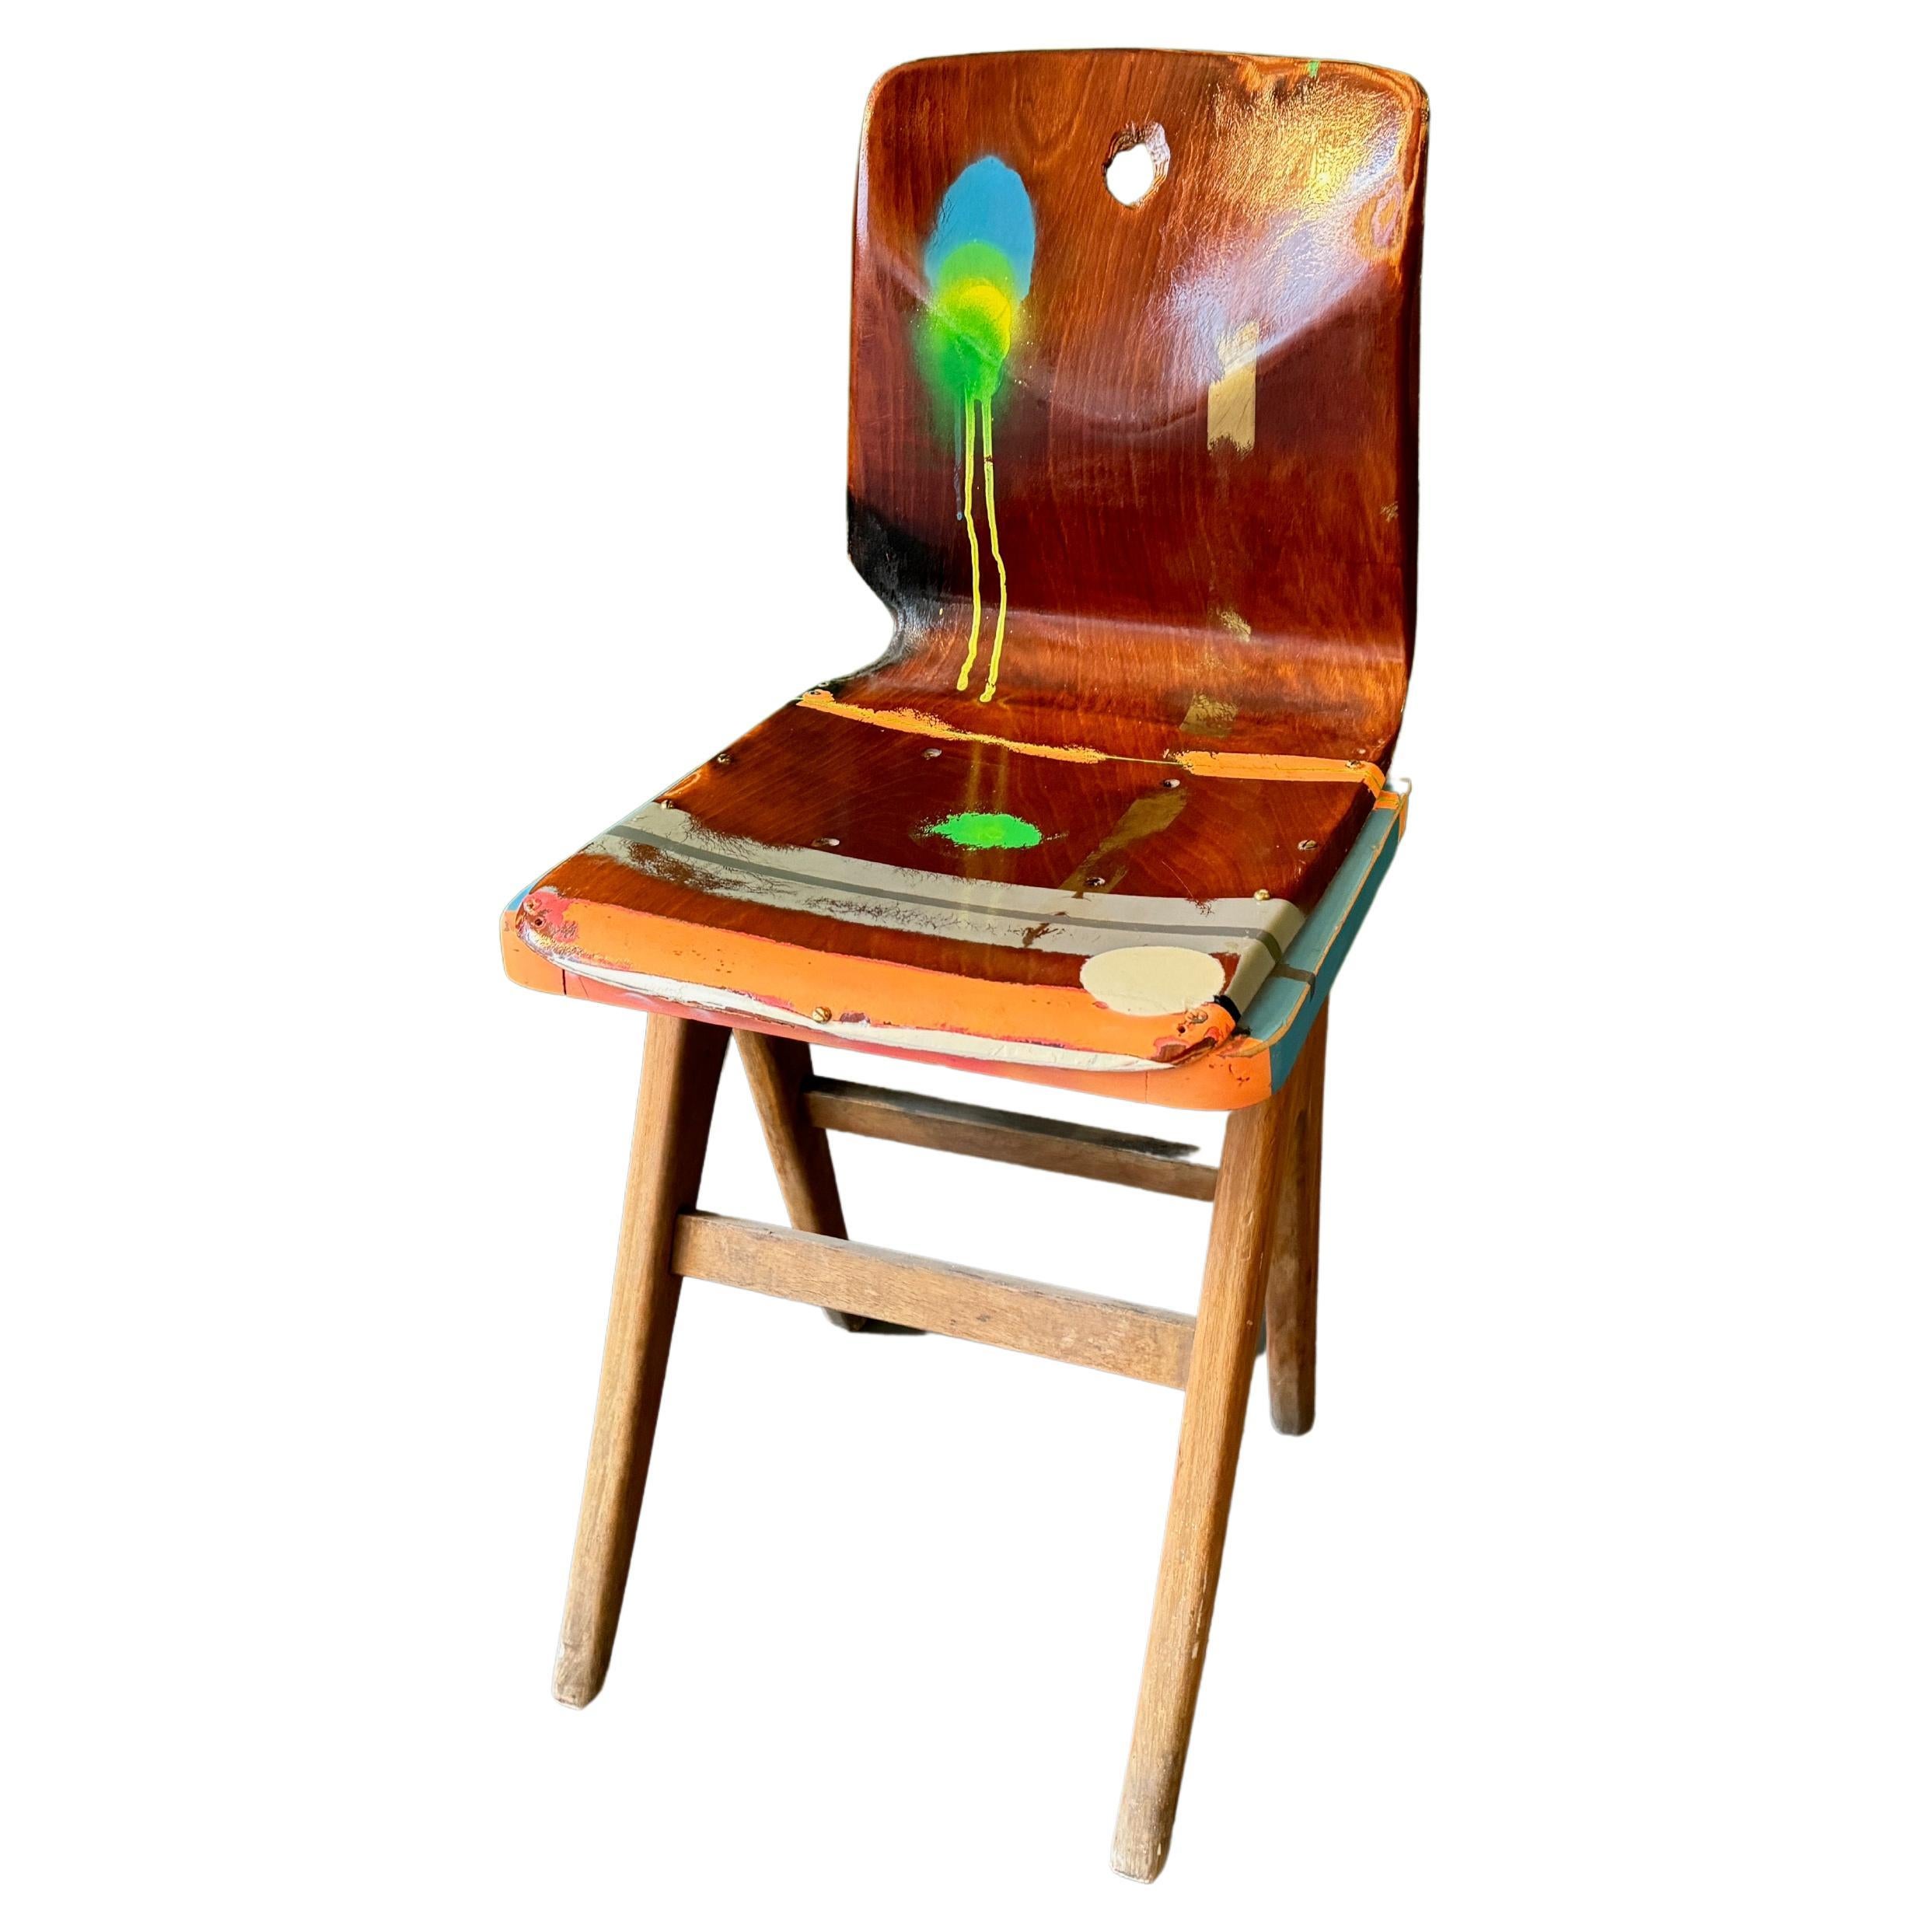 Side chair by Markus Friedrich Staab entitled " early works"